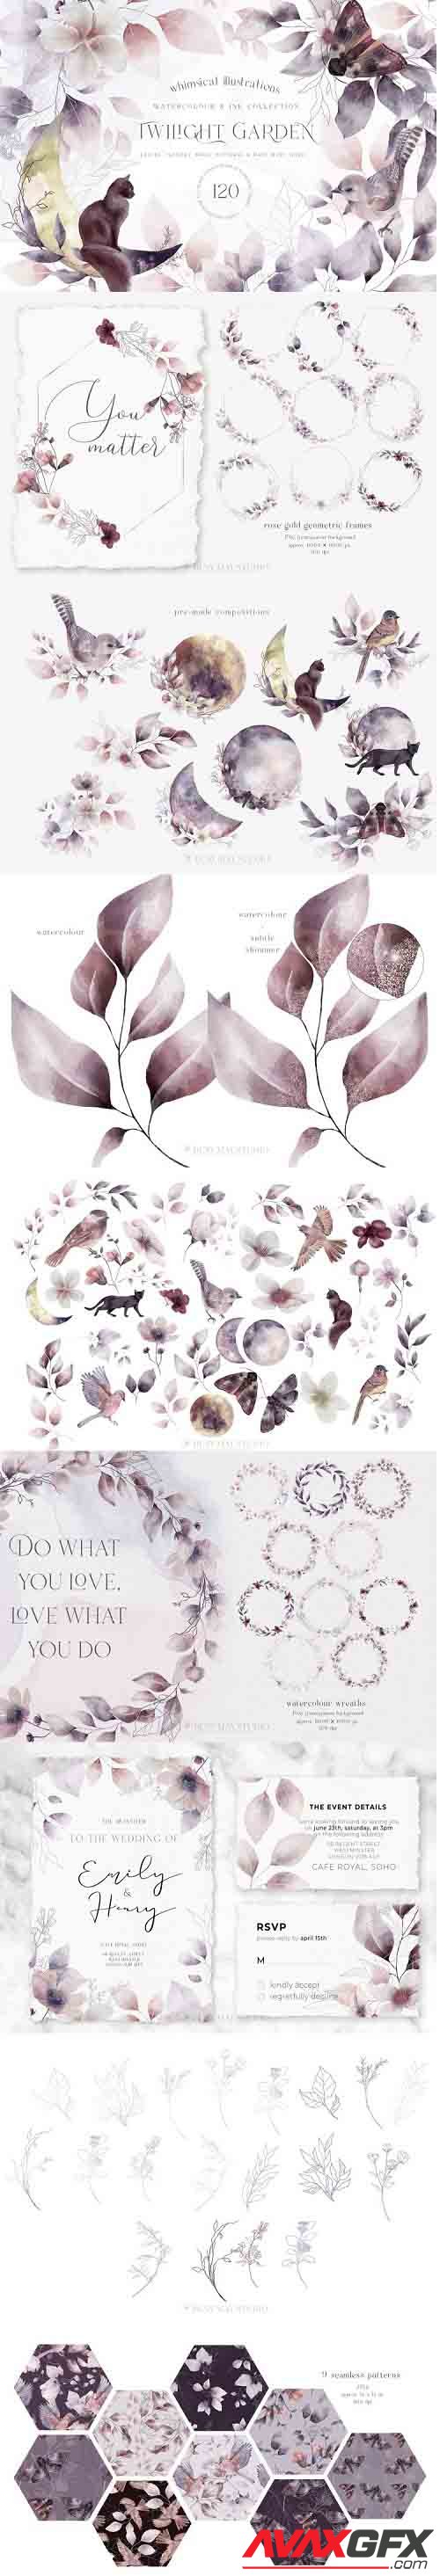 Whimsical Leaves Flowers Birds Moons Watercolor Patterns - 1284729 - Twilight Garden